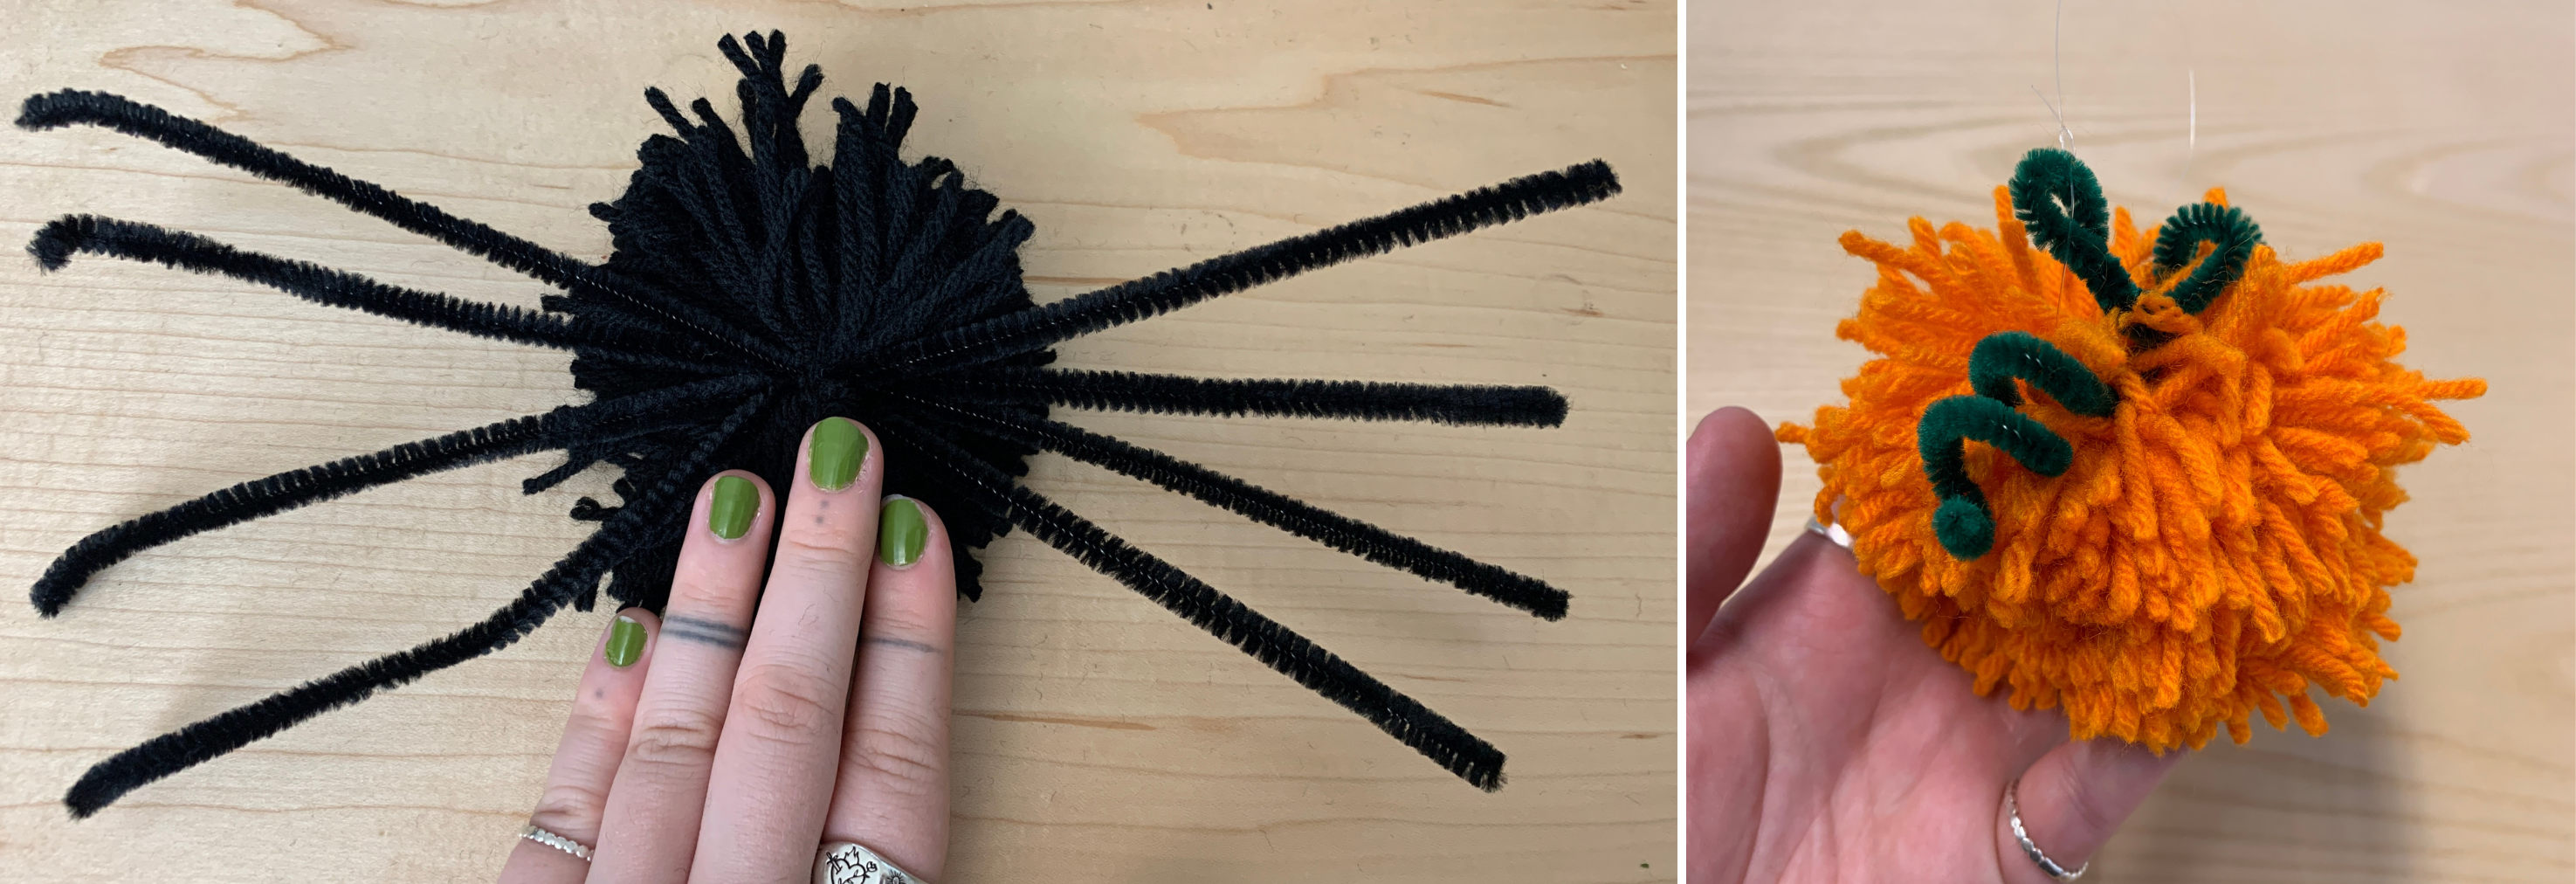 Two images together; one, on the left, depicts a spider pompom, with black yarn and black pipecleanrs as legs. On the right, a photo of a pumpkin pompom, with orange yarn and a green pipecleaner as the stem.